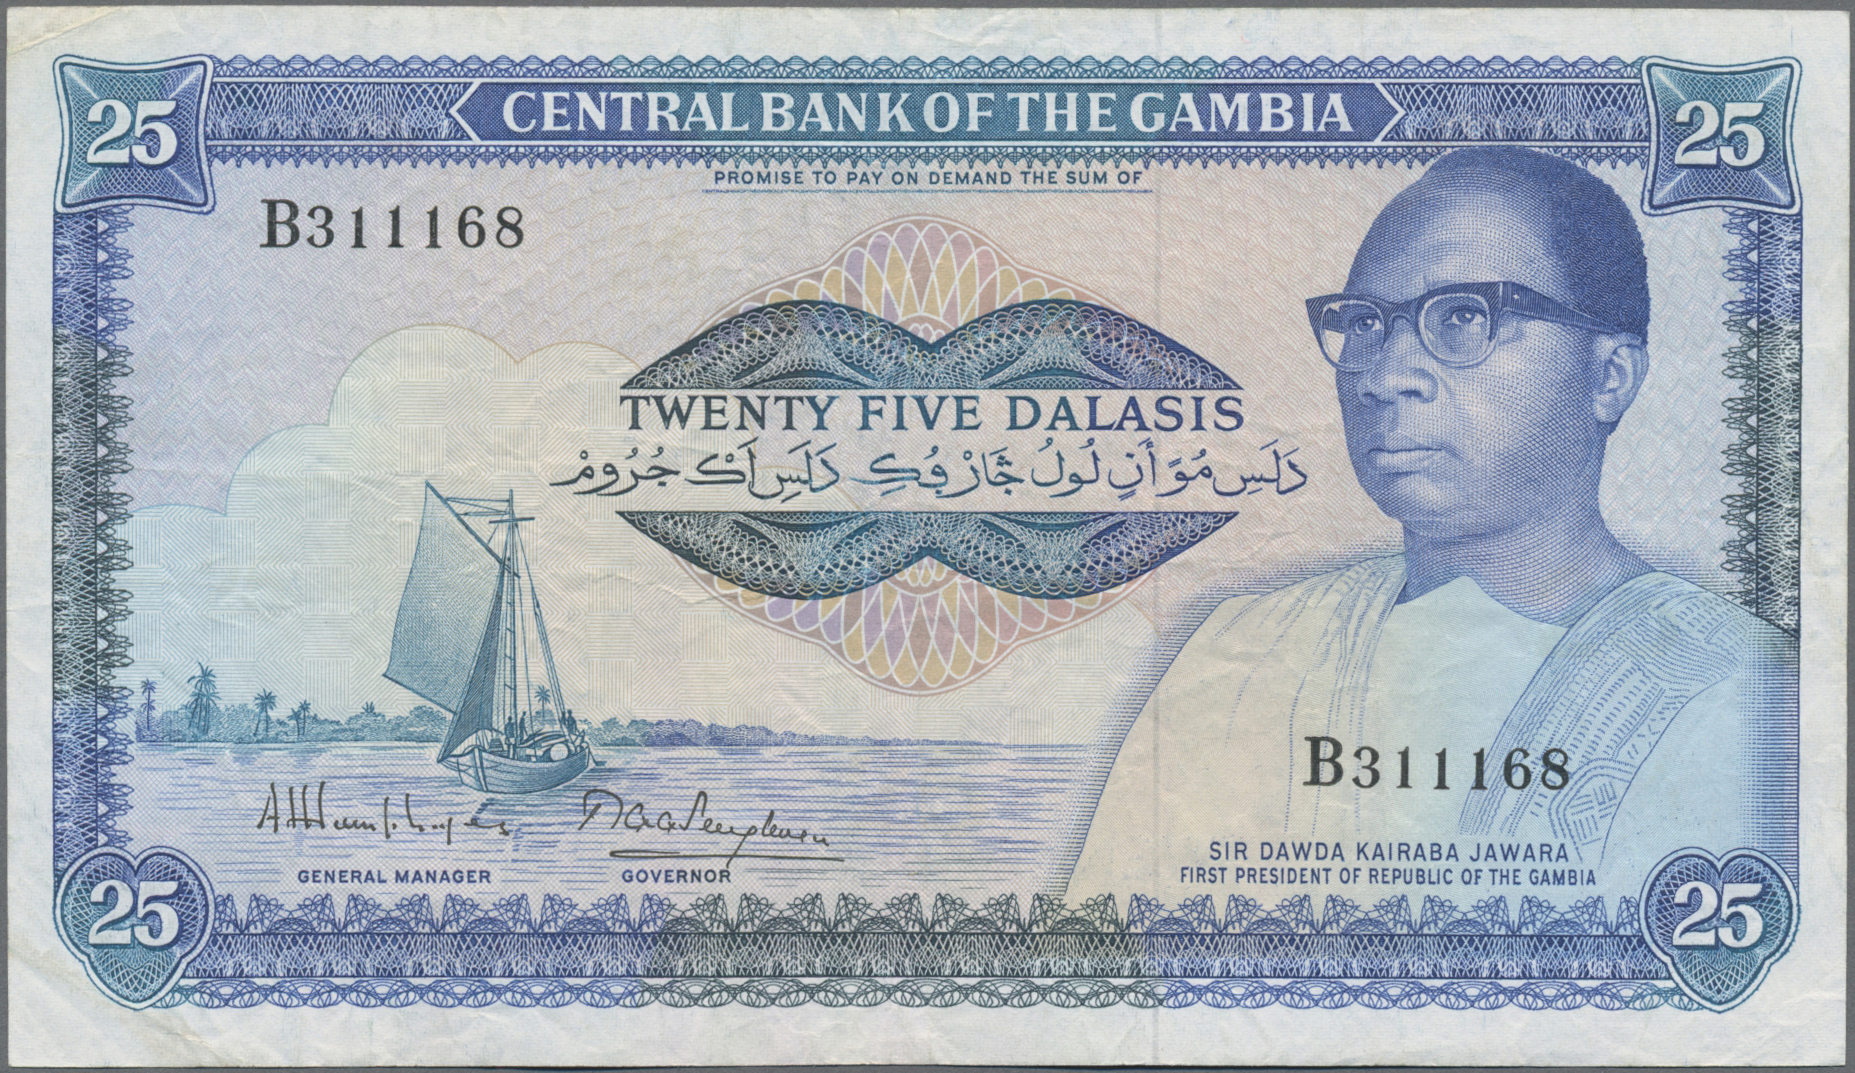 Lot 00210 - Gambia | Banknoten  -  Auktionshaus Christoph Gärtner GmbH & Co. KG 55th AUCTION - Day 1